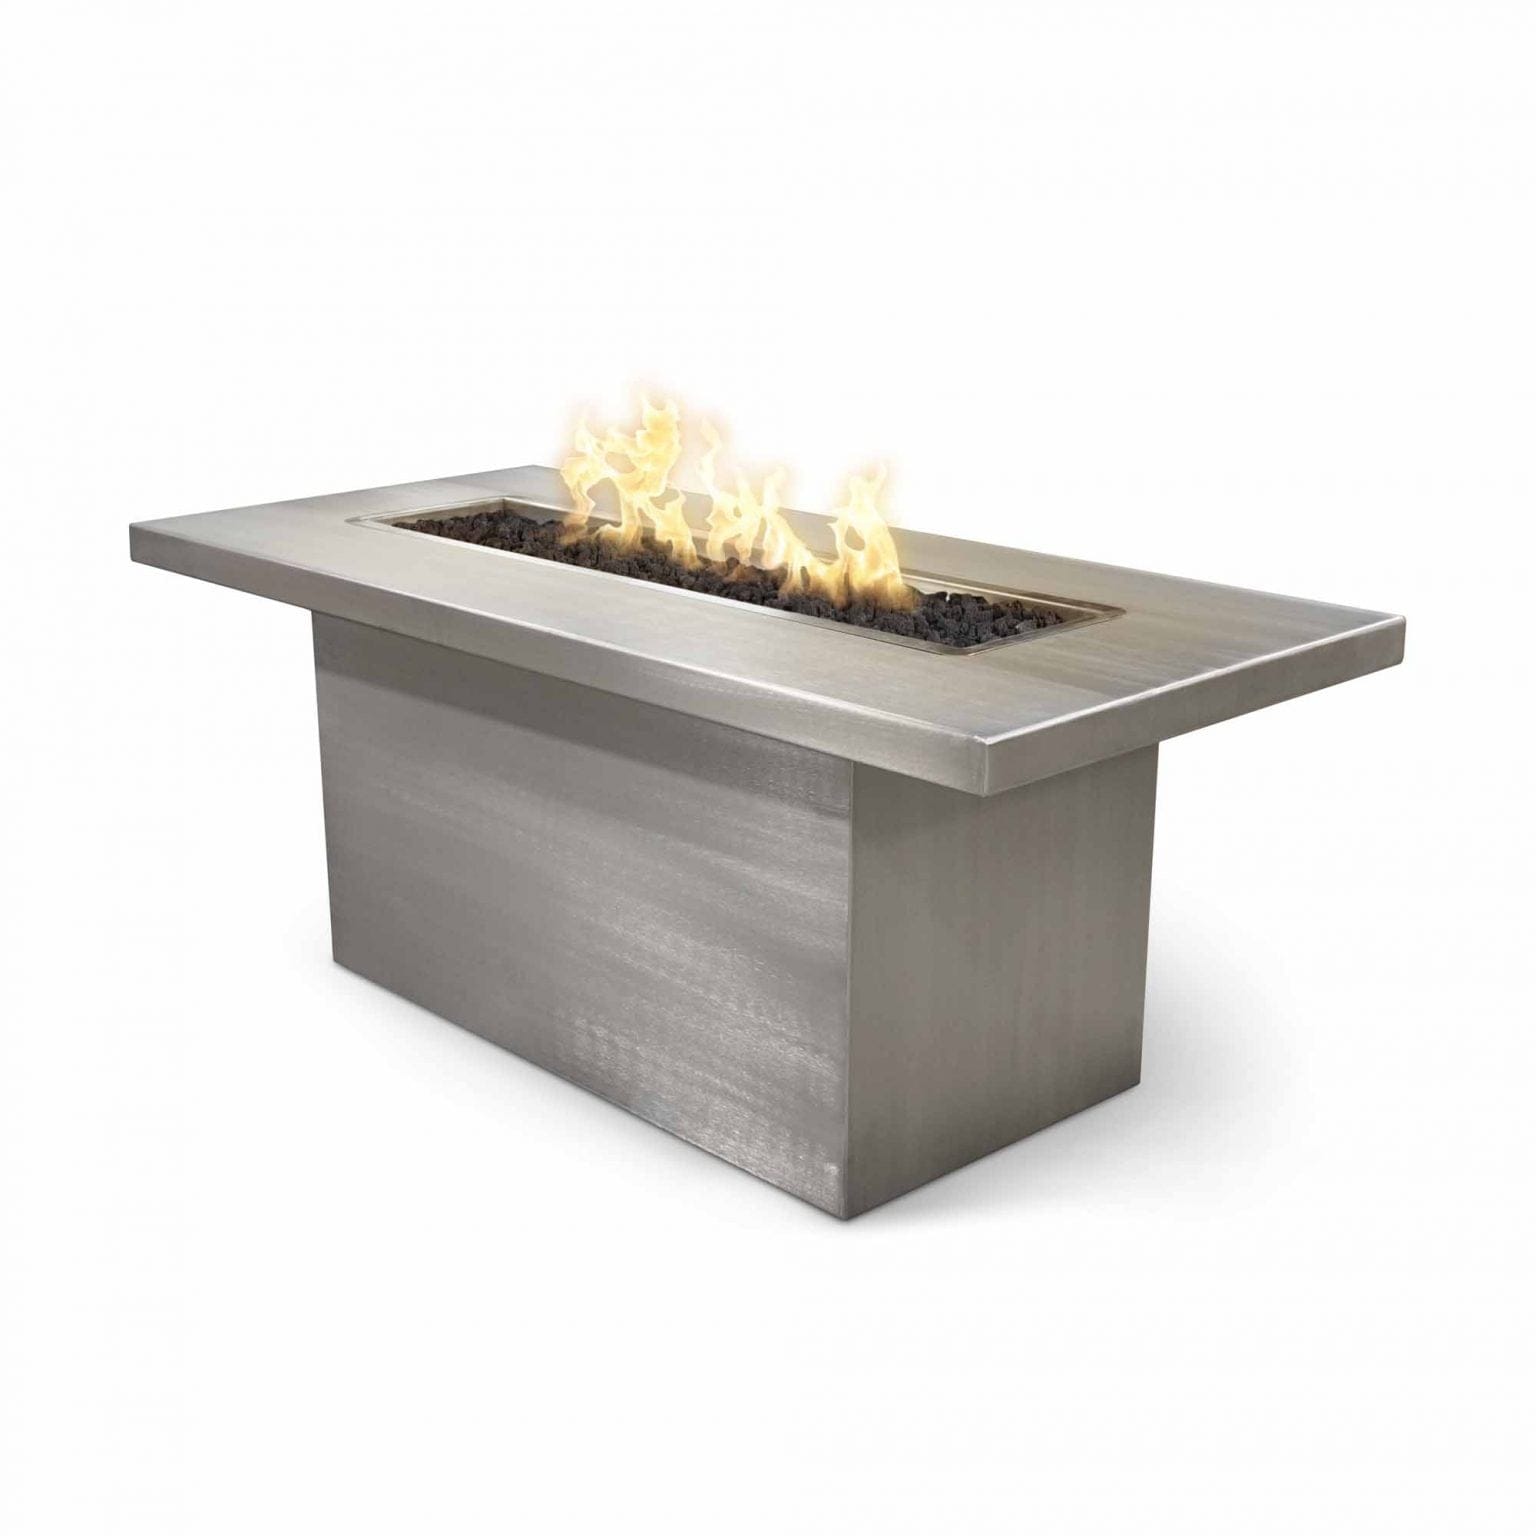 The Outdoor Plus Fire Pit 48" x 30" / Match Lit The Outdoor Plus Bella 48" x 30" Linear Fire Table | Stainless Steel OPT-BELLSS4830